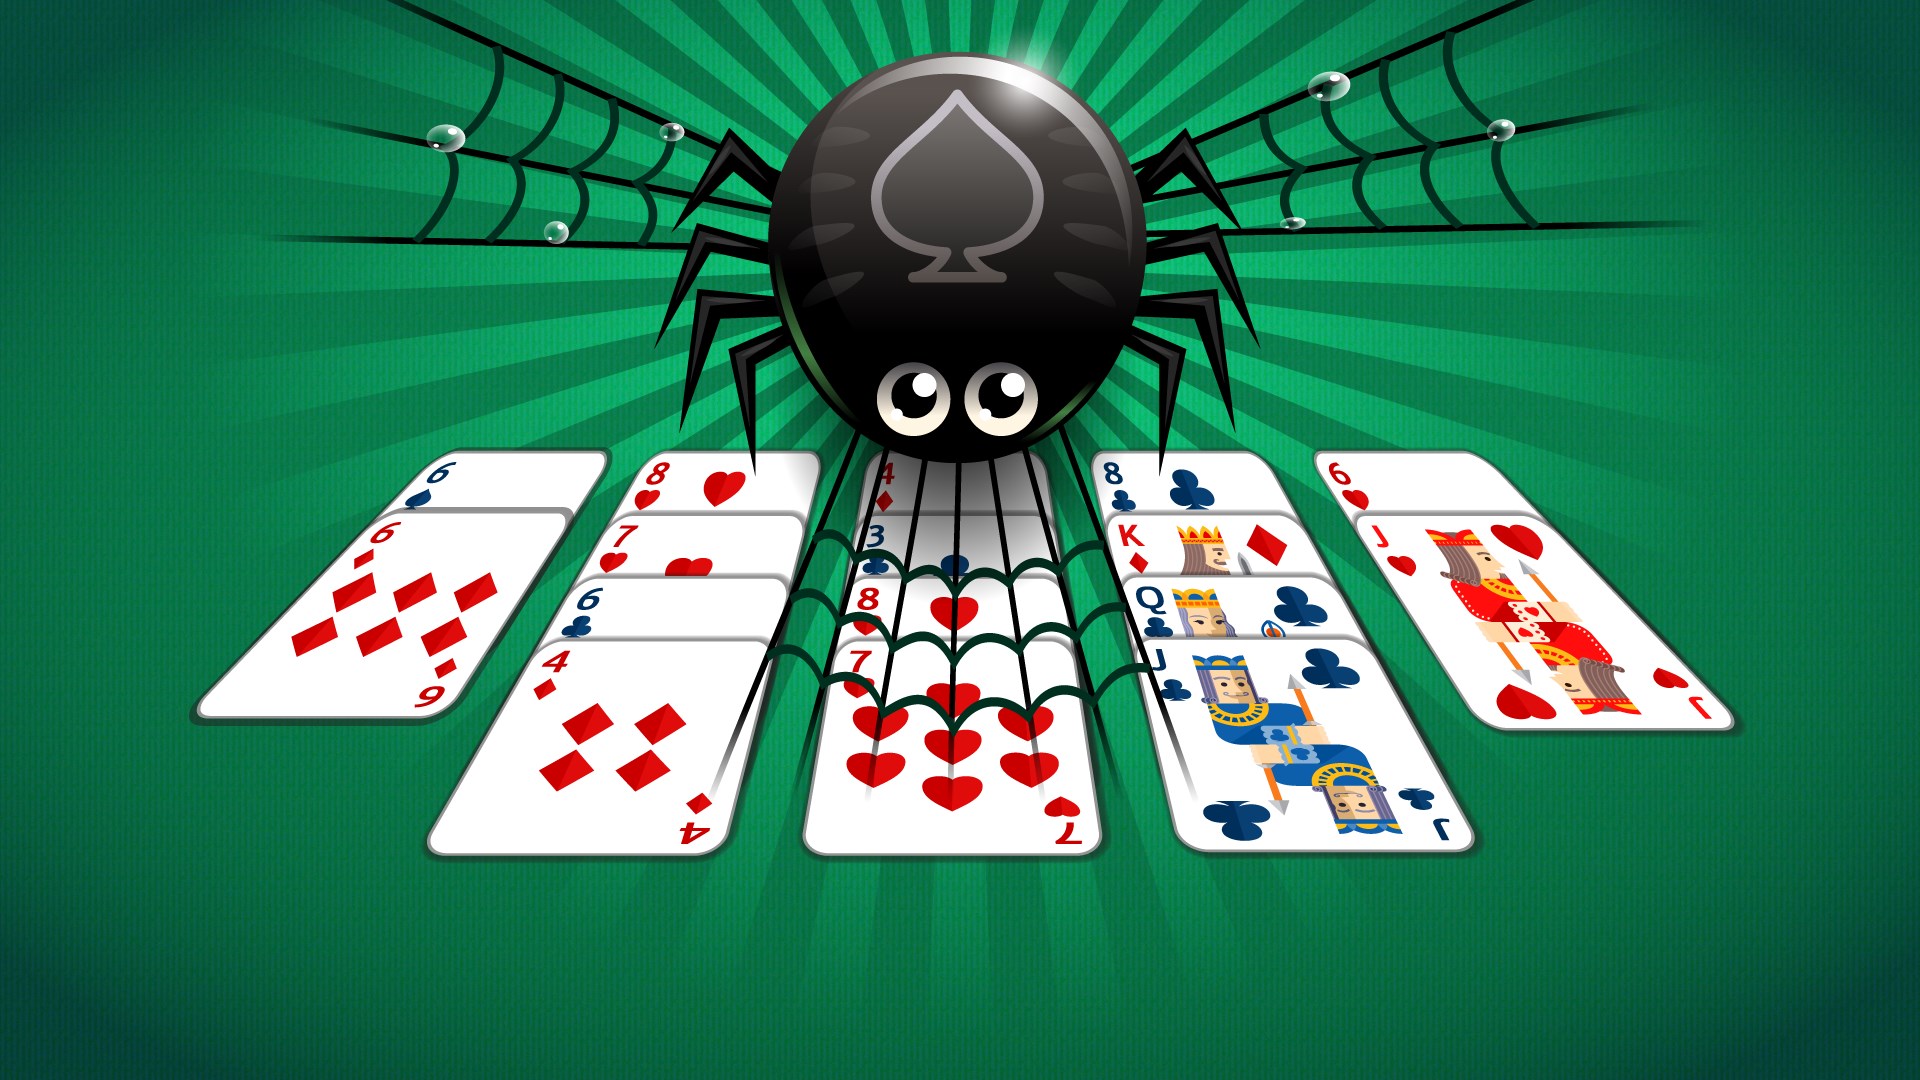 free easy spider solitaire games